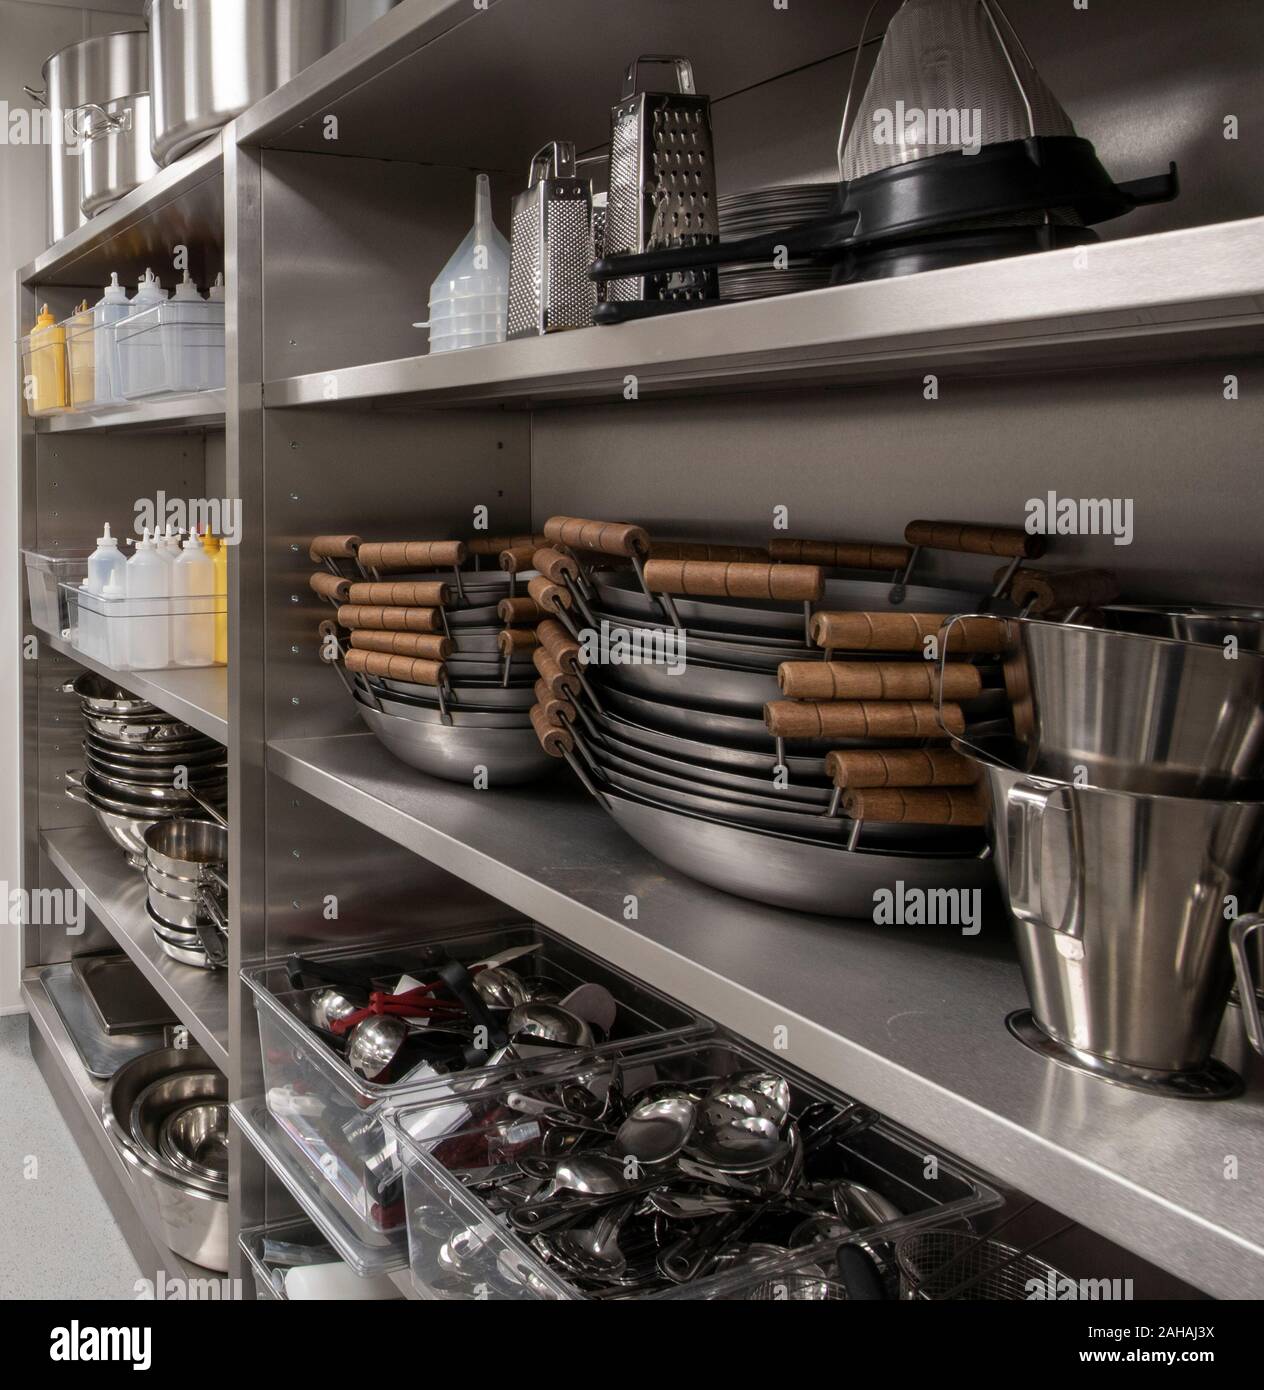 Professional Cooking Utensils Hanging Restaurant Kitchen Stock Photo by  ©.shock 193223954